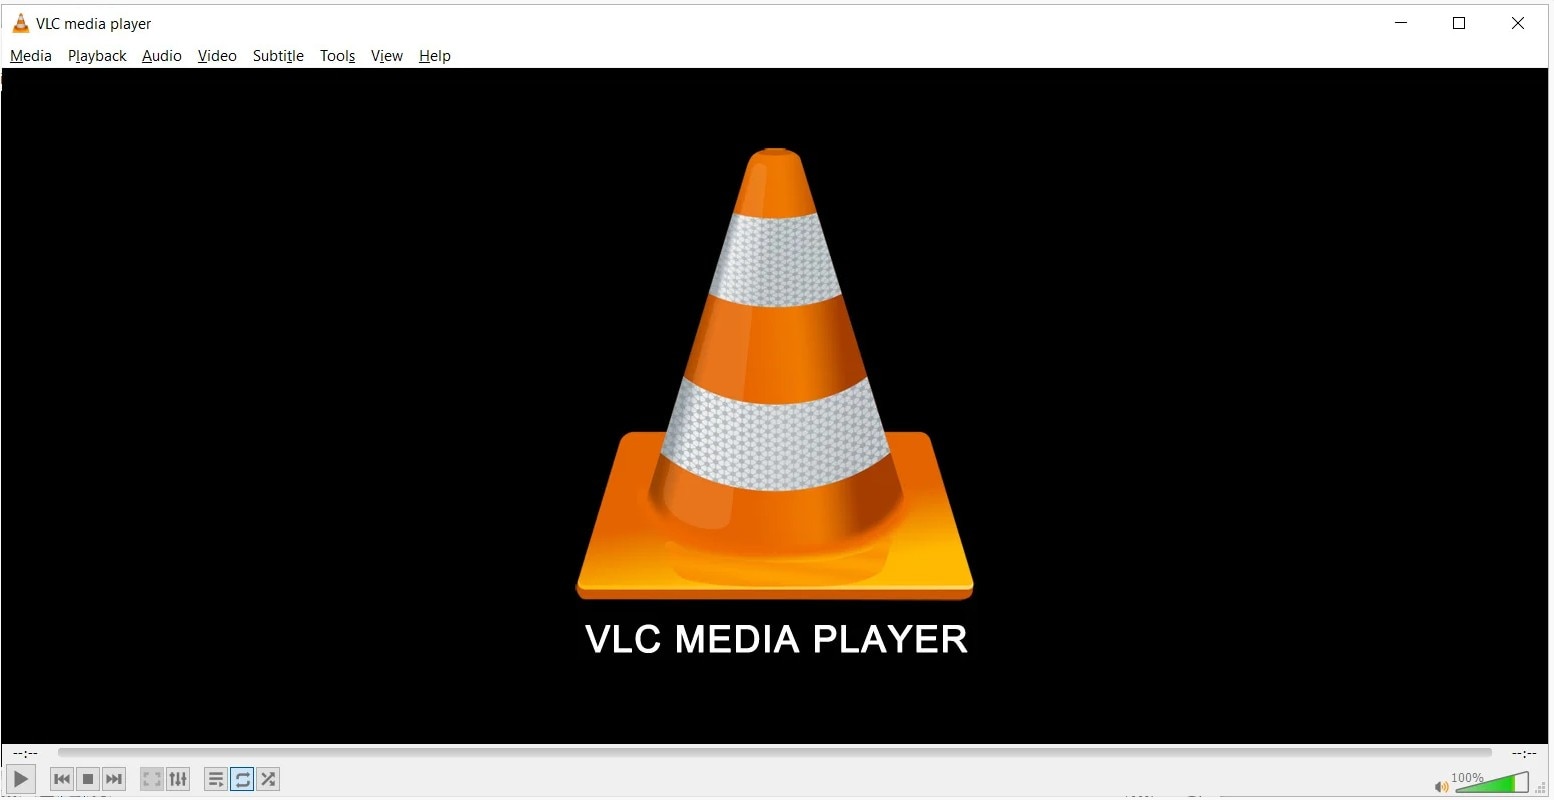  vlc media player for playing MKV